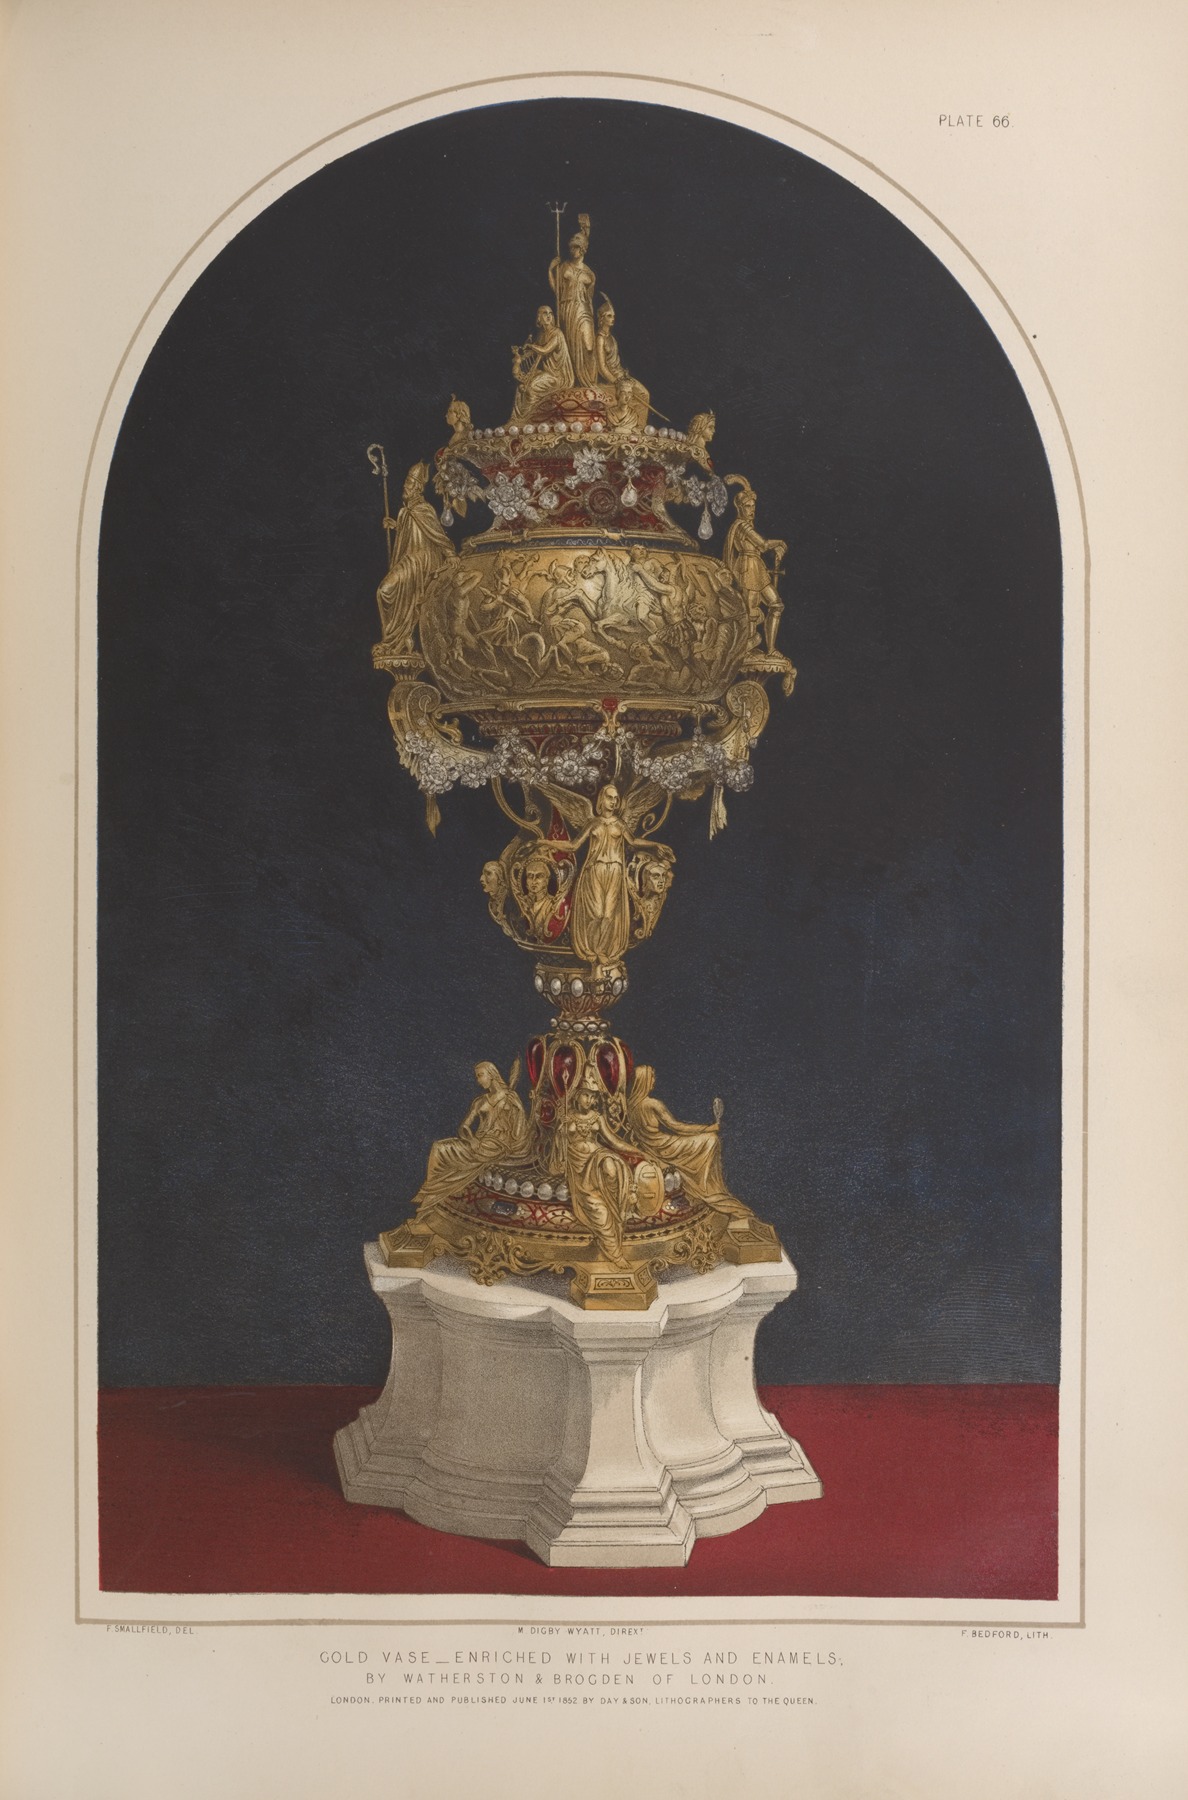 Matthew Digby Wyatt - Gold vase – enriched with jewels and enamels